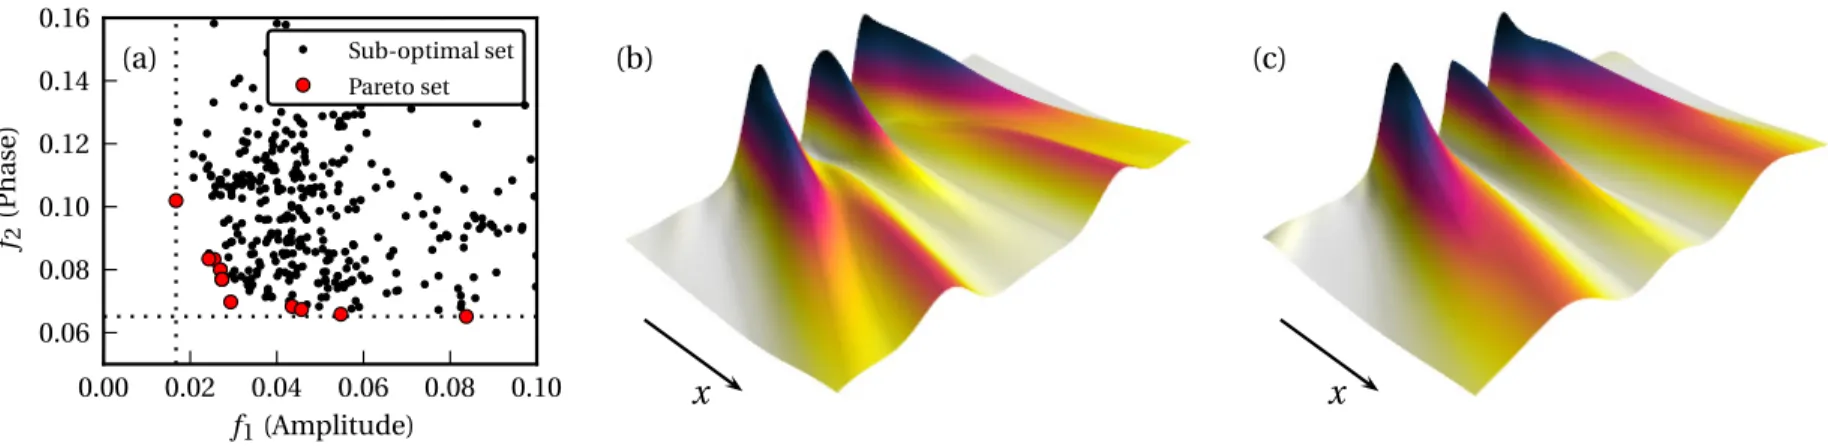 Figure 5.3 – Multiobjective optimization results. (a) Sampling of the Pareto front for the coherent beam shaping problem